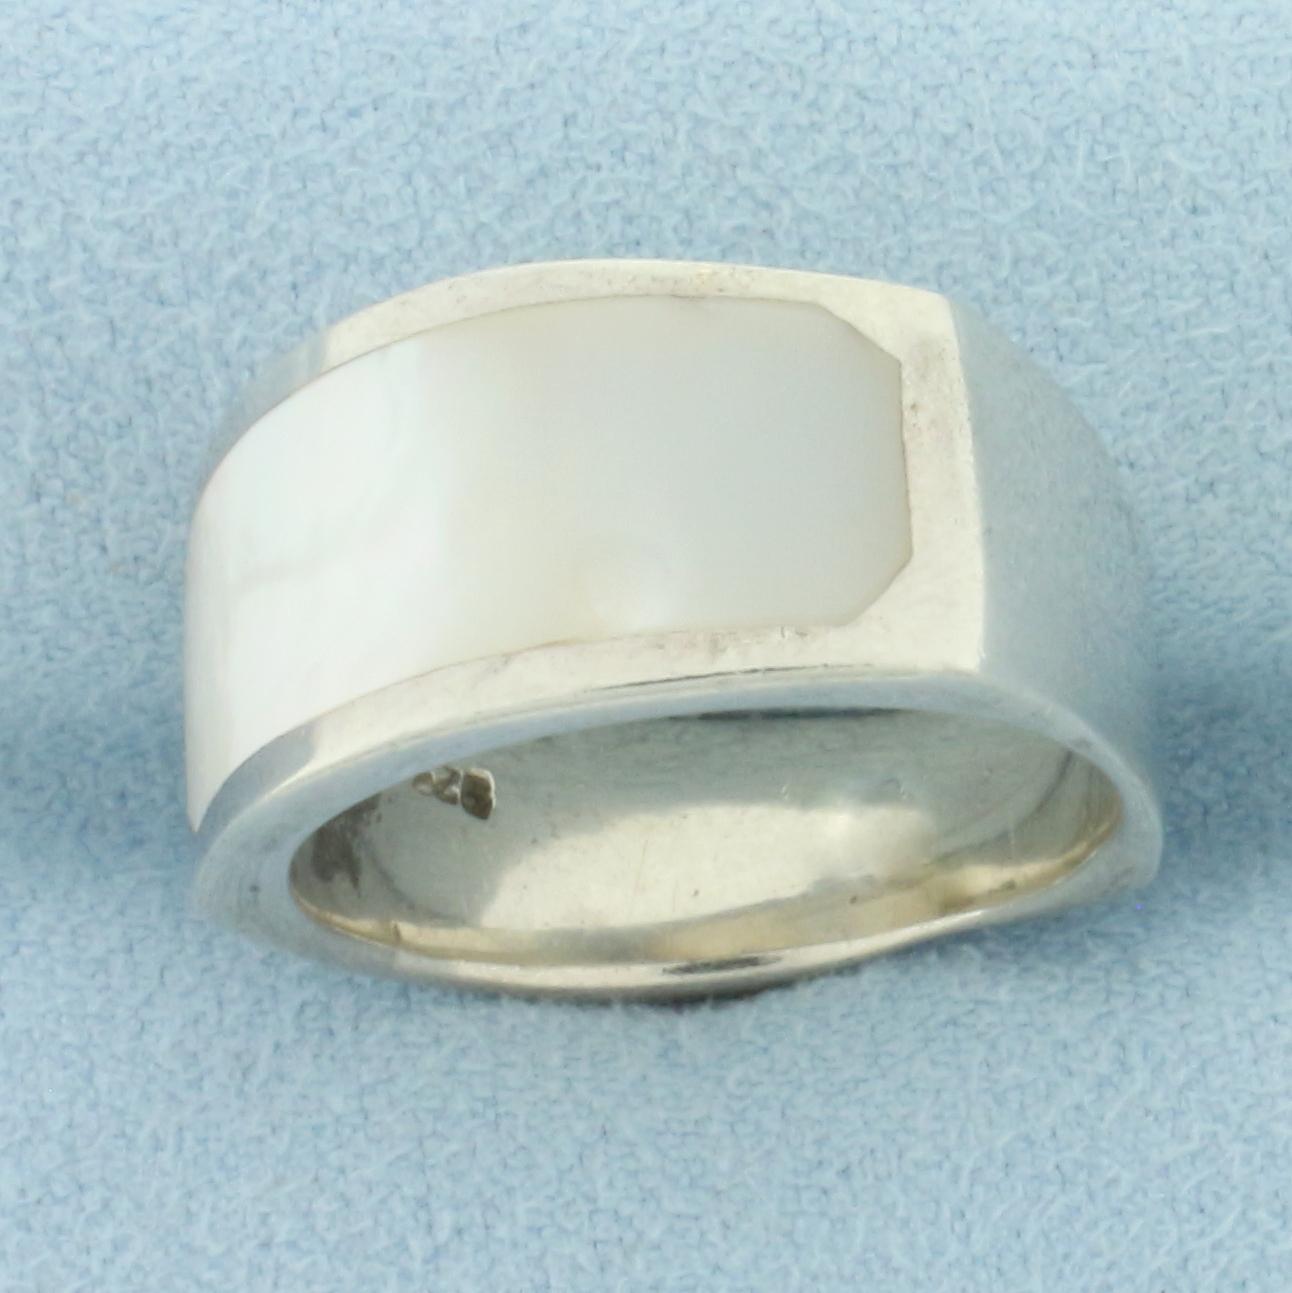 Mother Of Pearl Inlay Modern Ring In Sterling Silver